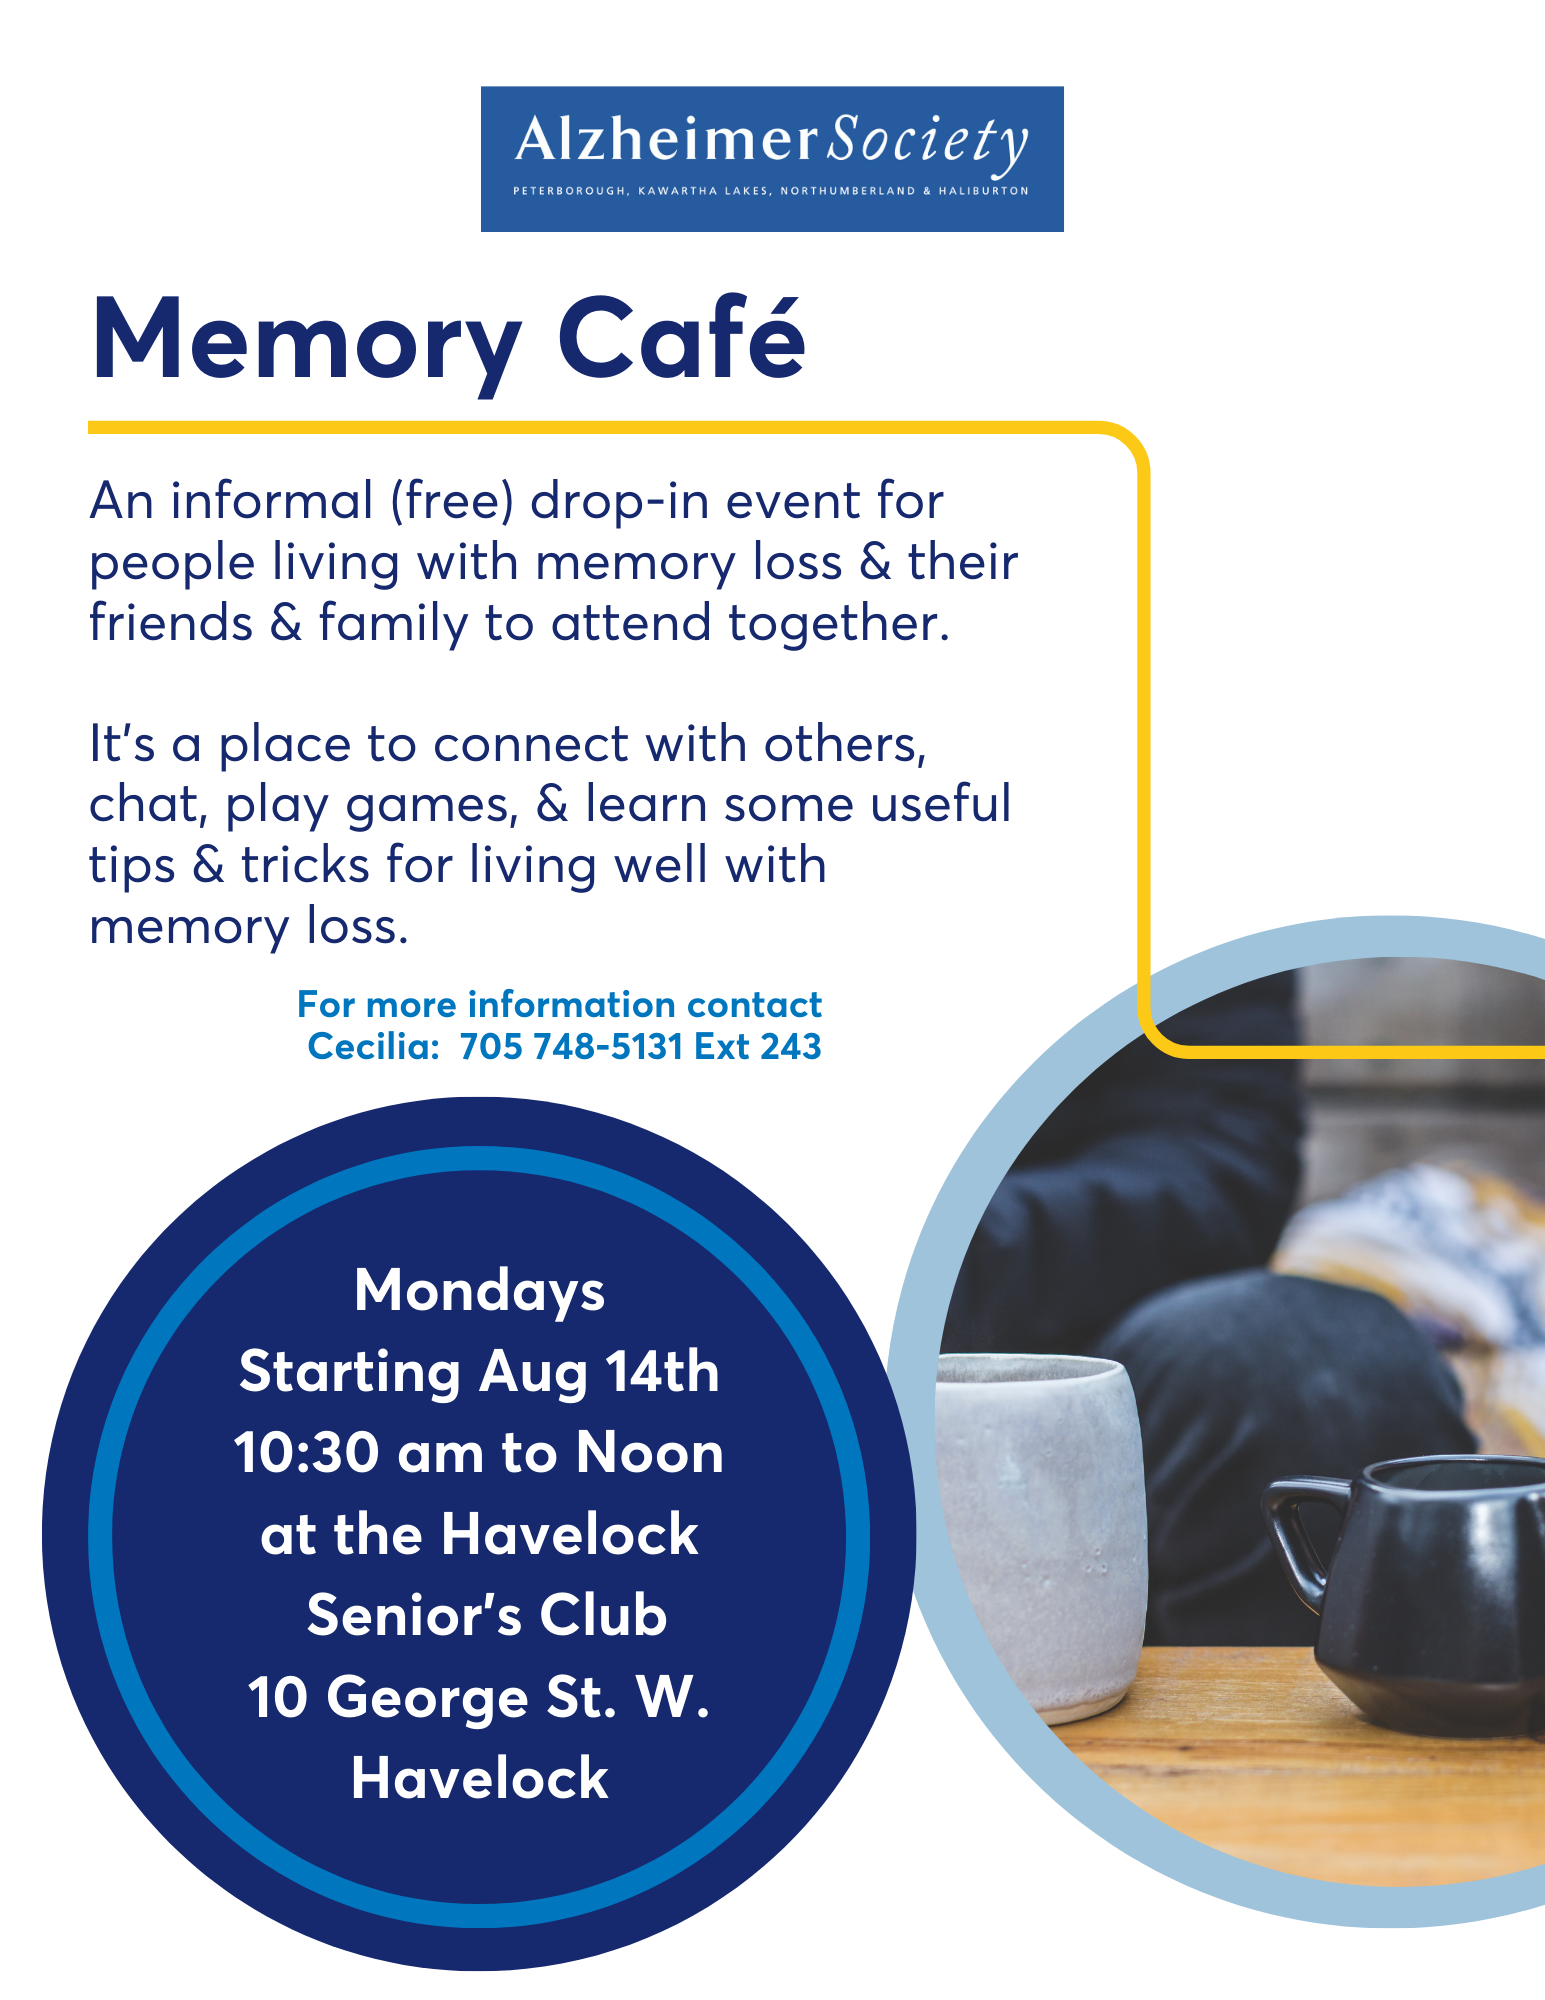 Memory Cafe poster